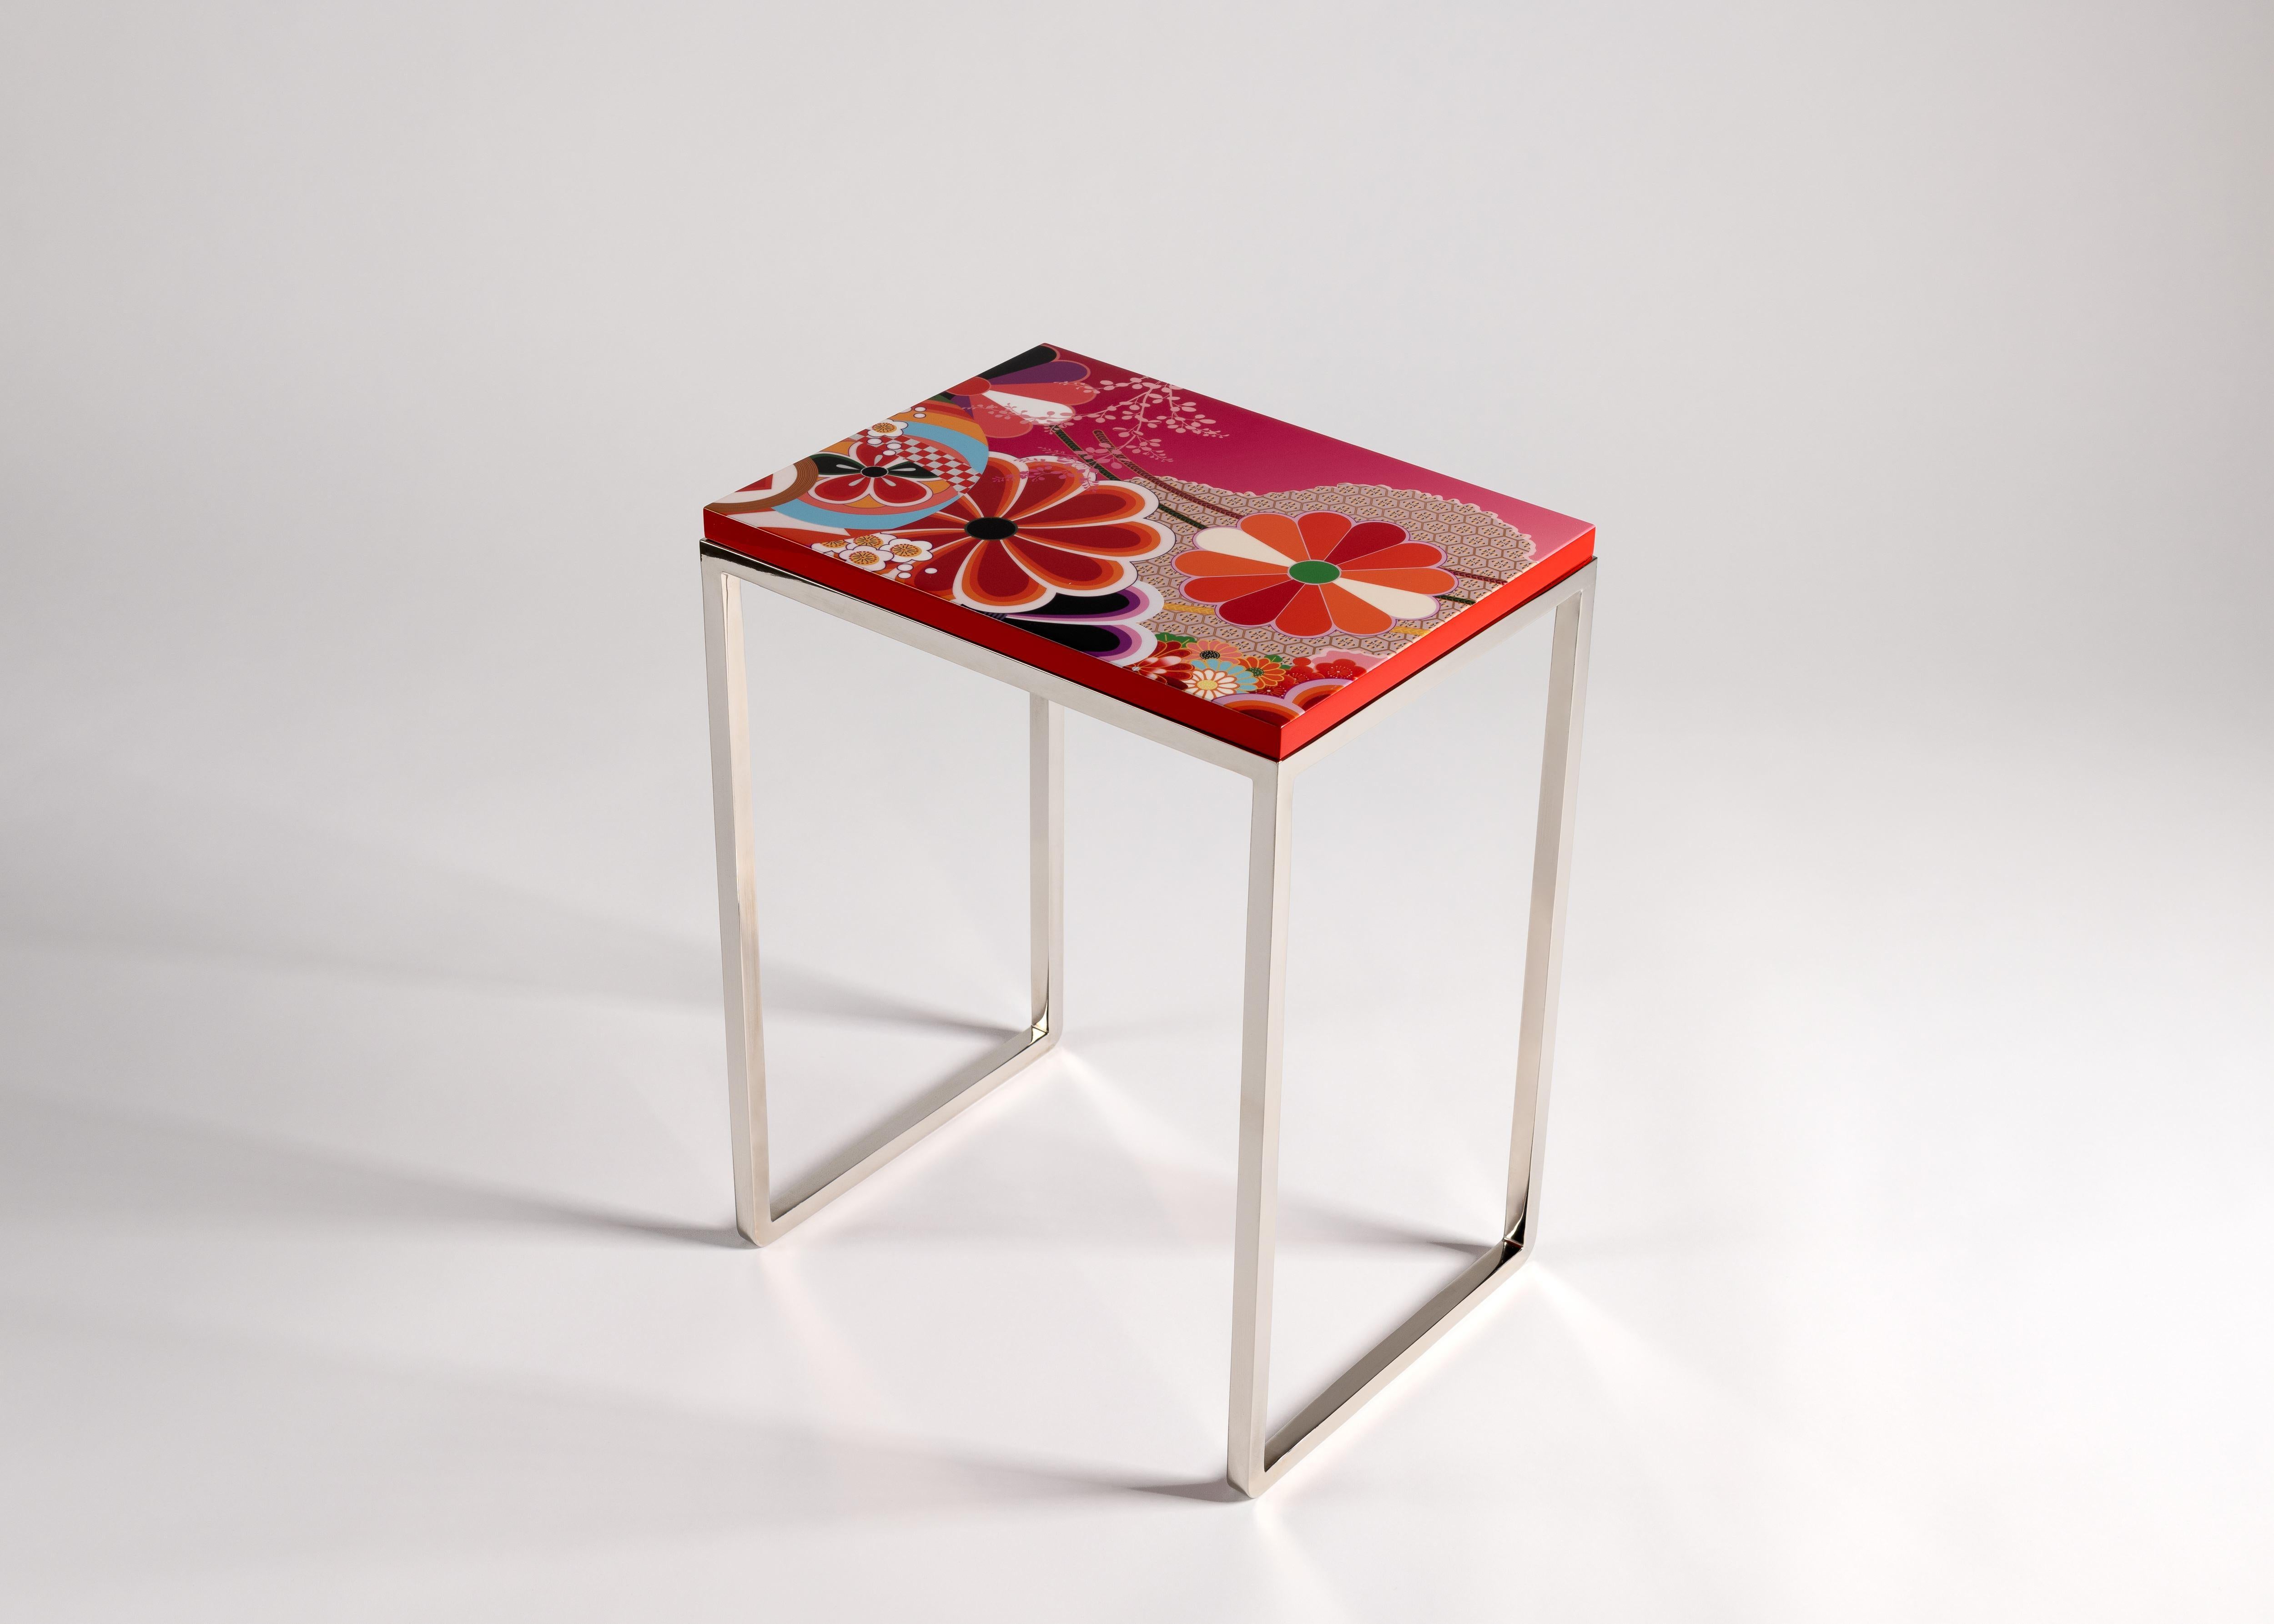 Zelouf & Bell are masters of creating refined, sophisticated custom pieces reflecting the unique needs and bespoke tastes of collectors and clients around the world.

Kiku, a lacquered side table with nickel-plated legs, is covered in a bright